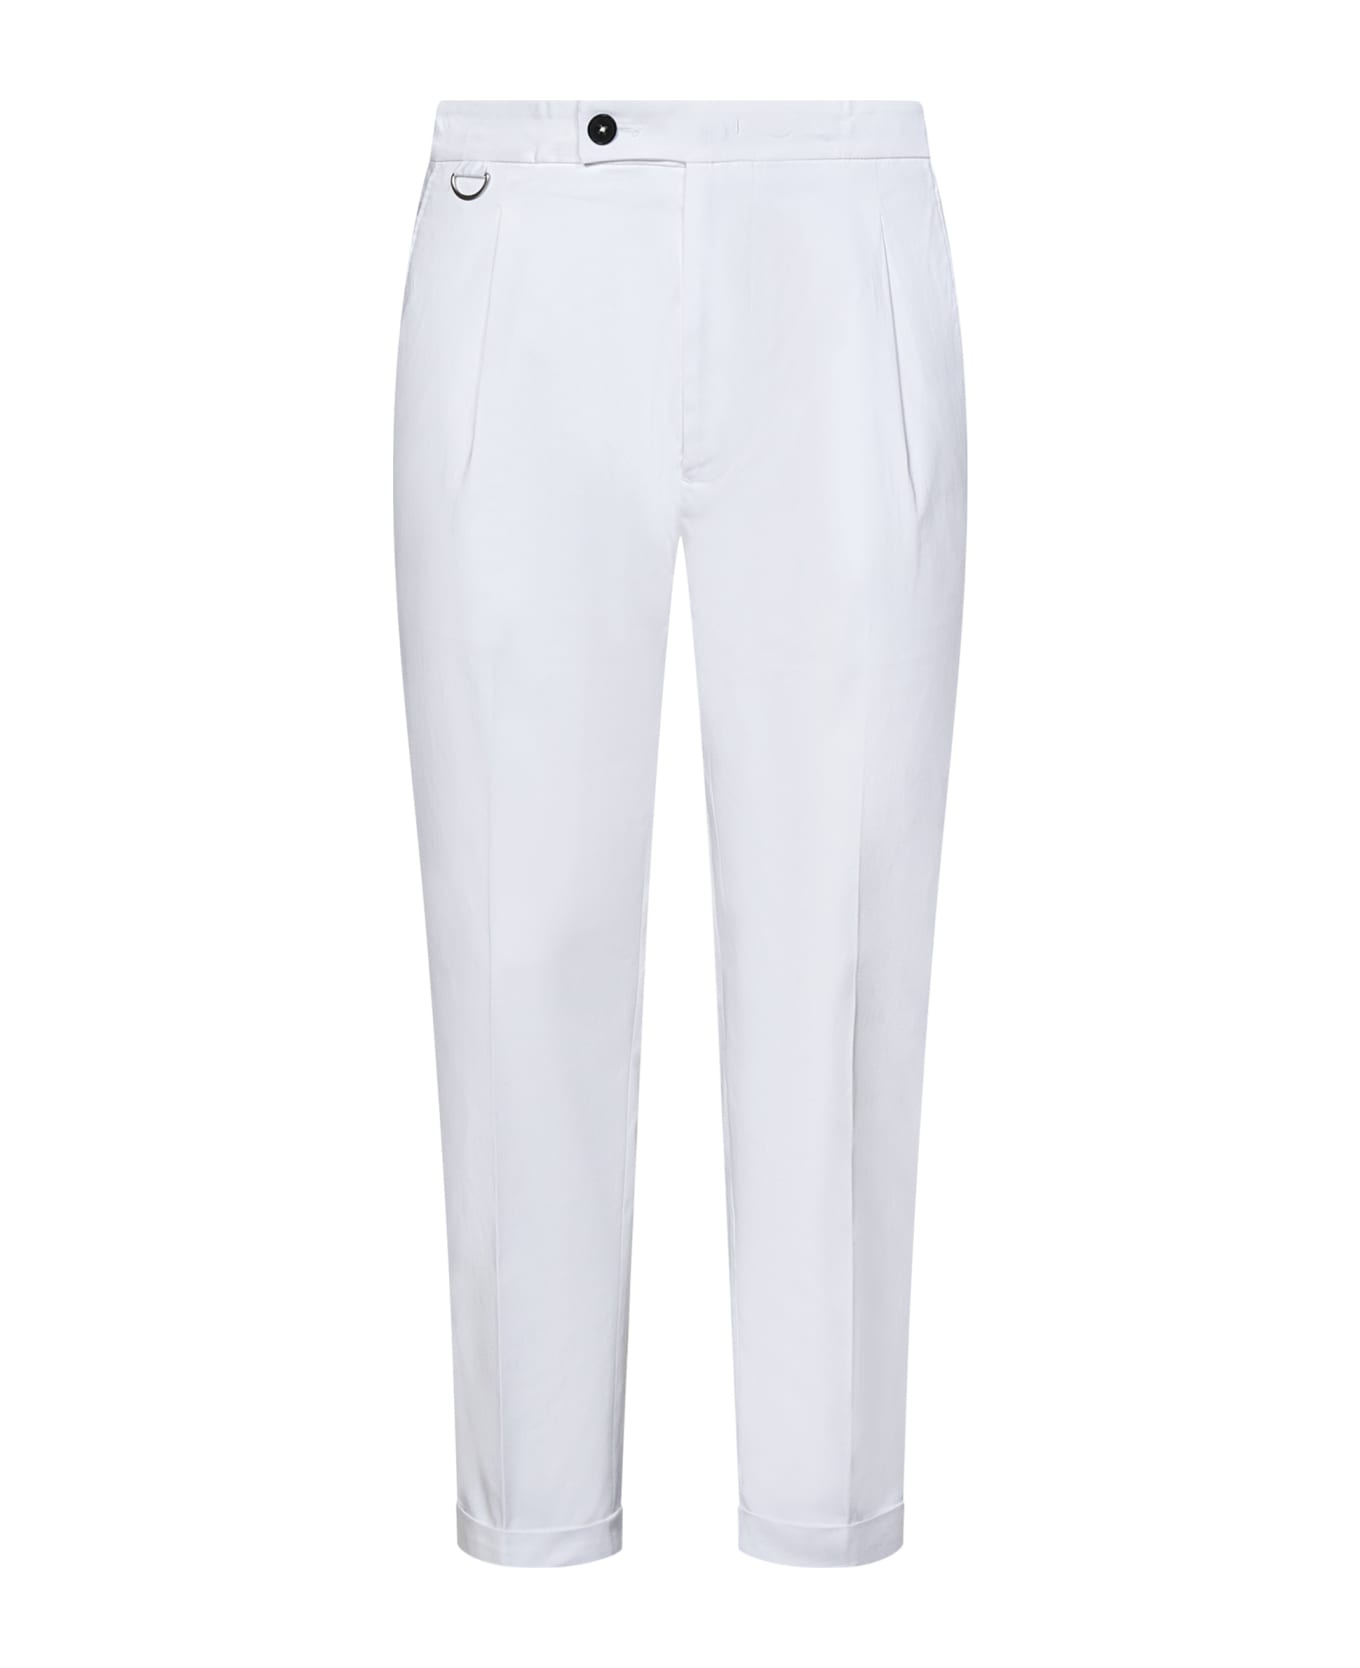 Low Brand Riviera Elastic Trousers - White